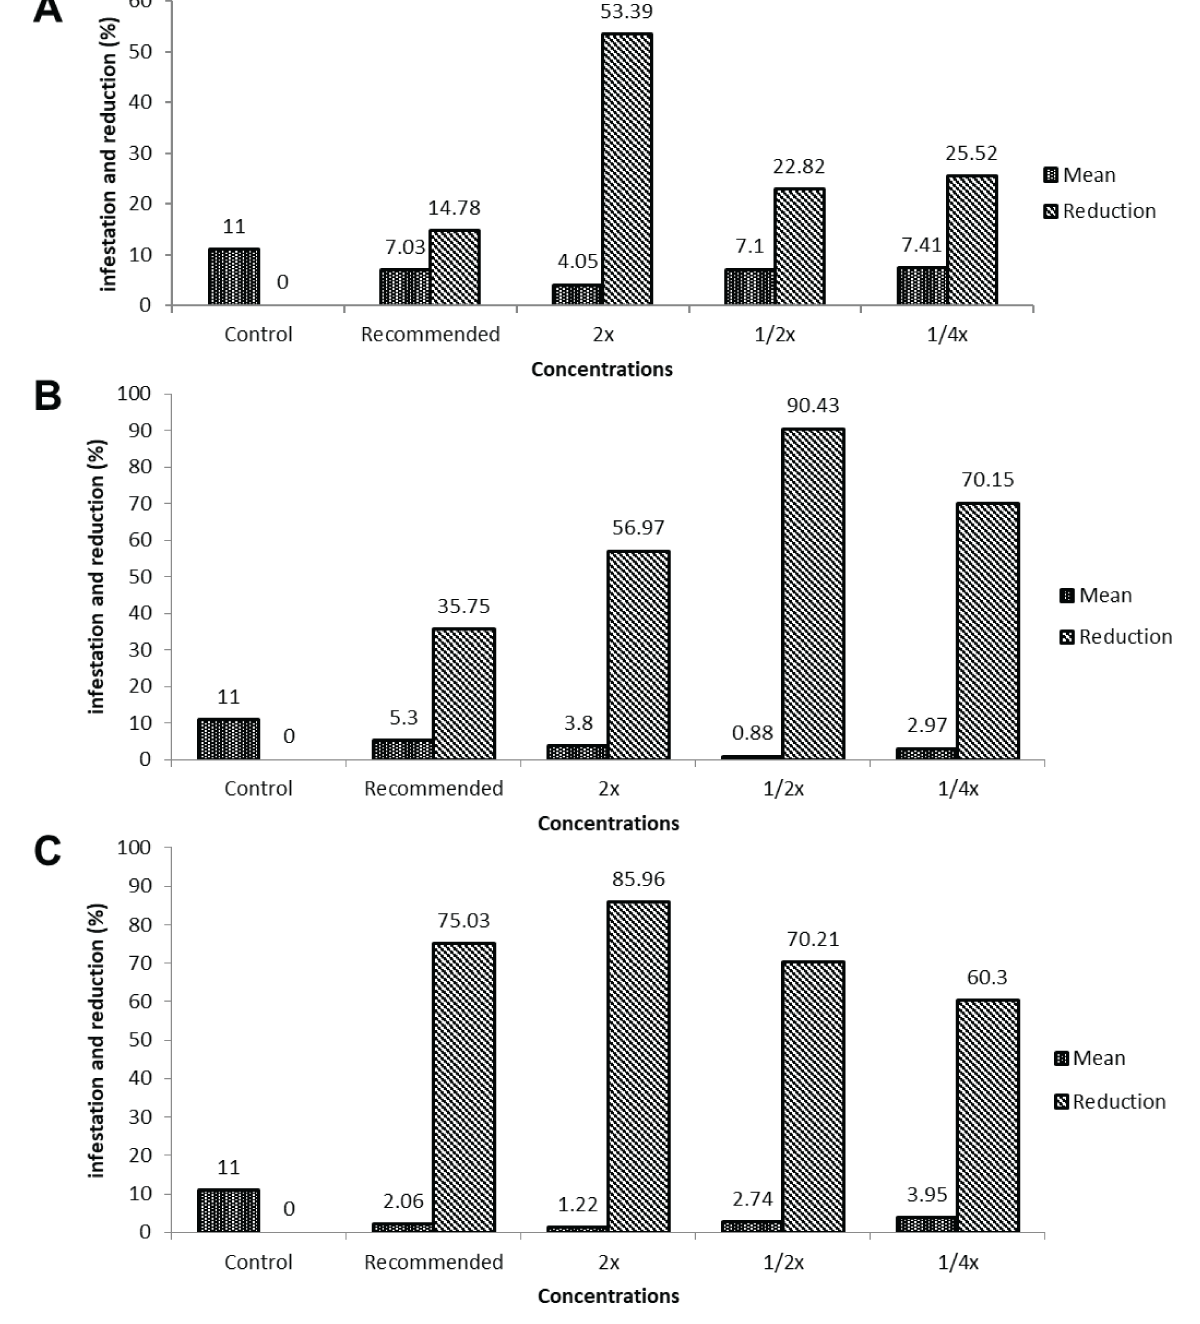 Effect of treatment concentrations on maize stem borer infestation reduction across post-treatment intervals. (A) Shows infestation percentages and reductions at various concentrations, with 1/2x and 2x of FRD exhibiting the highest reductions (53.39%) at 3 days post-treatment for maize stem borer. (B) Illustrates infestation rates and reductions, highlighting that 1/2x and 2x of FRD achieved the highest reductions (90.43%) at 7 days post-treatment. (C) Depicts infestation percentages and reductions over time, emphasizing concentrations of 1/2x and 2x of FRD with the highest reductions (85.96%) at the 14-day post-treatment interval for maize stem borer.